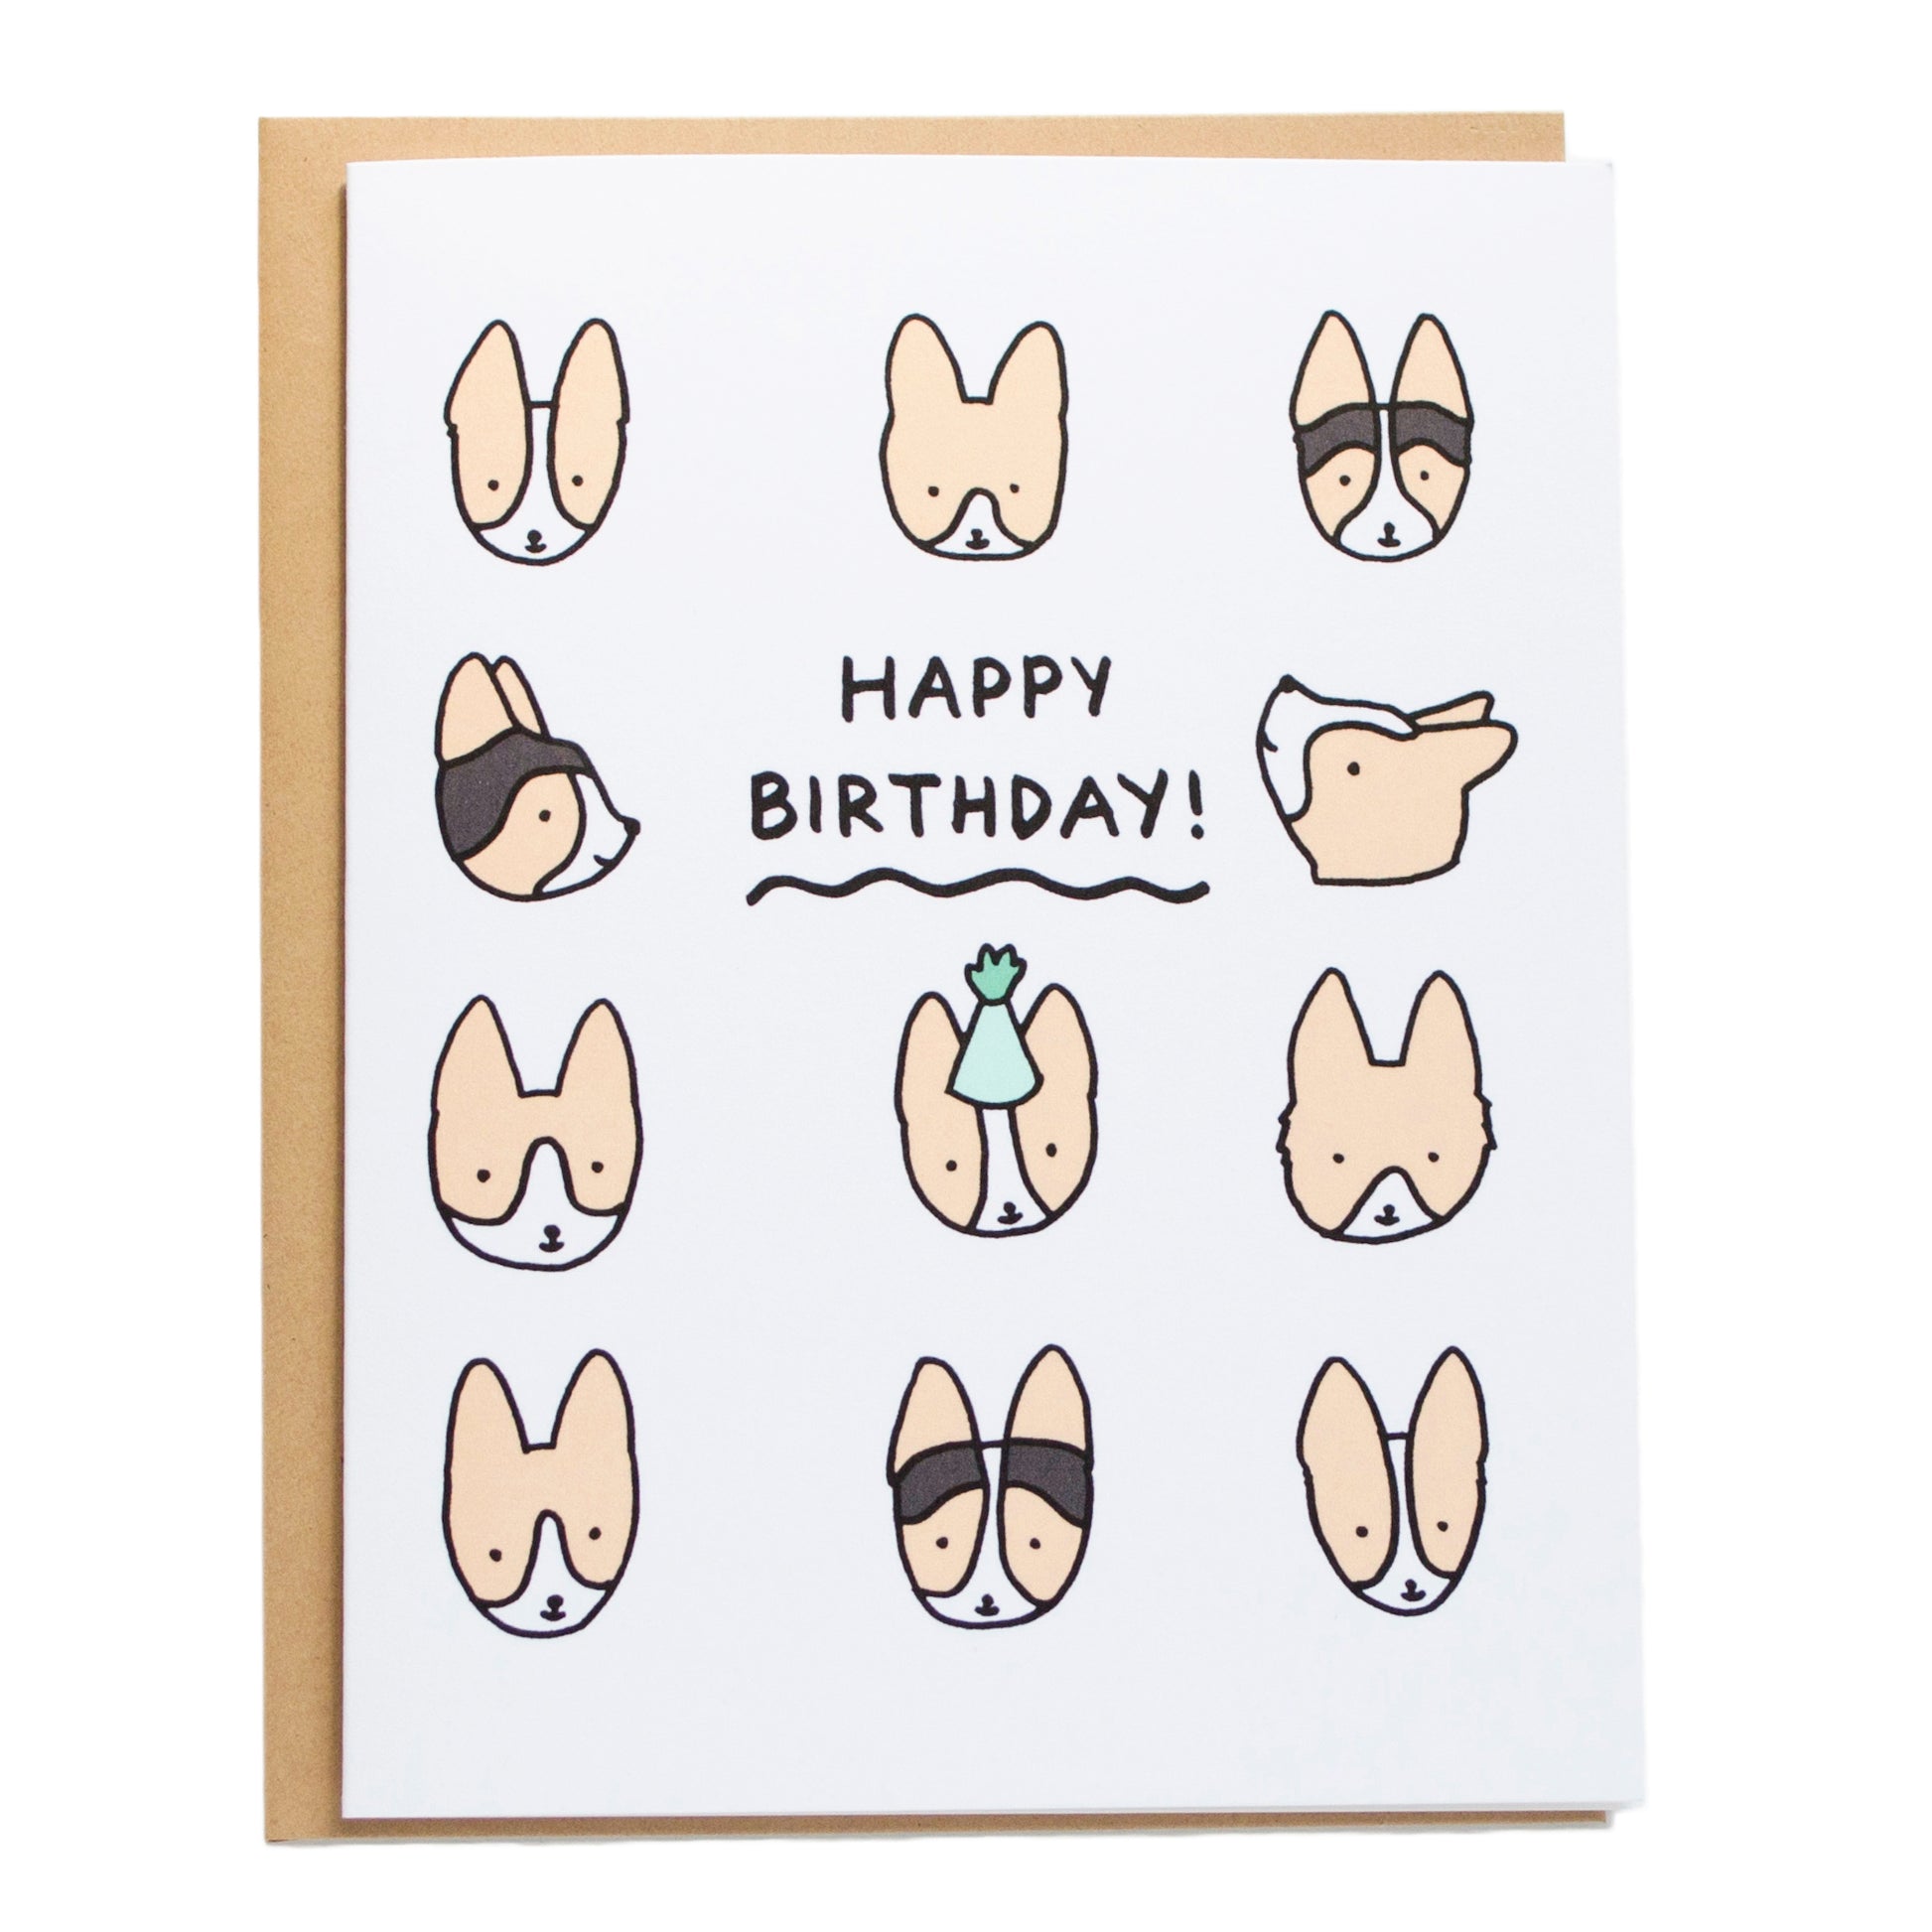 a card with 11 different corgi heads and tricolor corgis, card says happy birthday in the middle